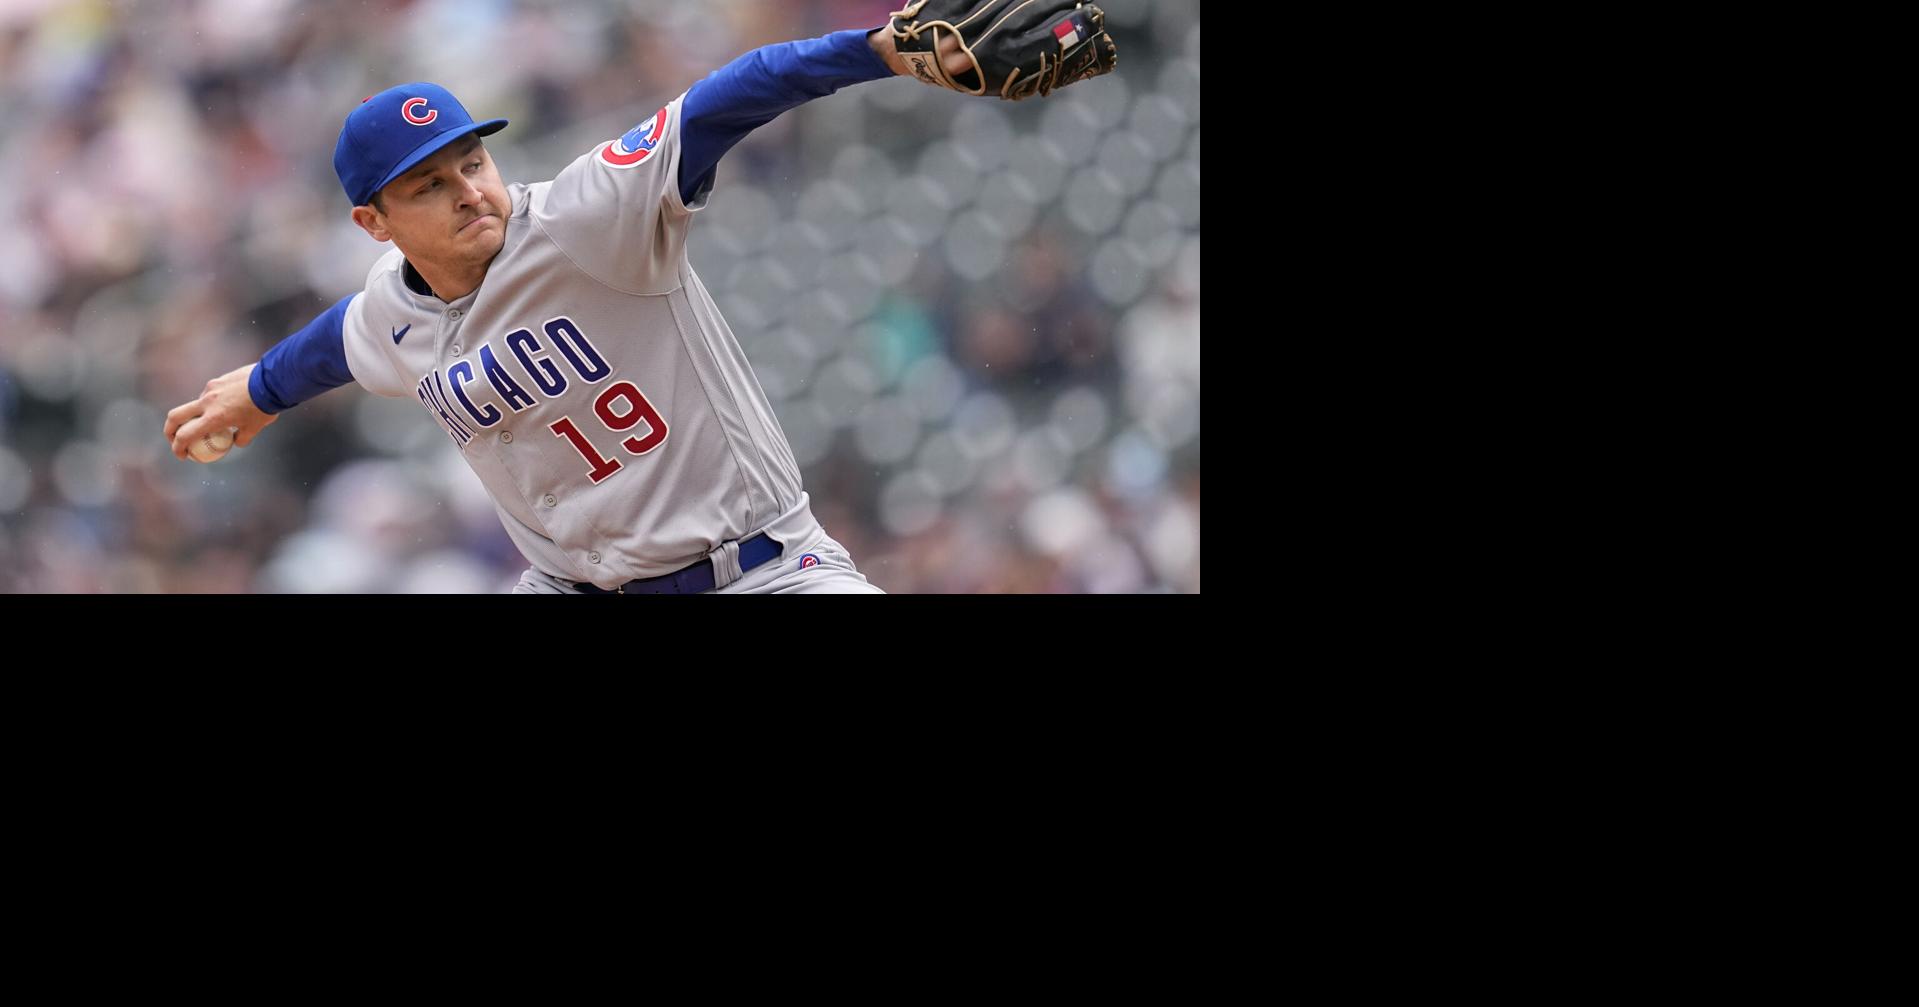 13 unlucky ways Cubs players have suffered injuries